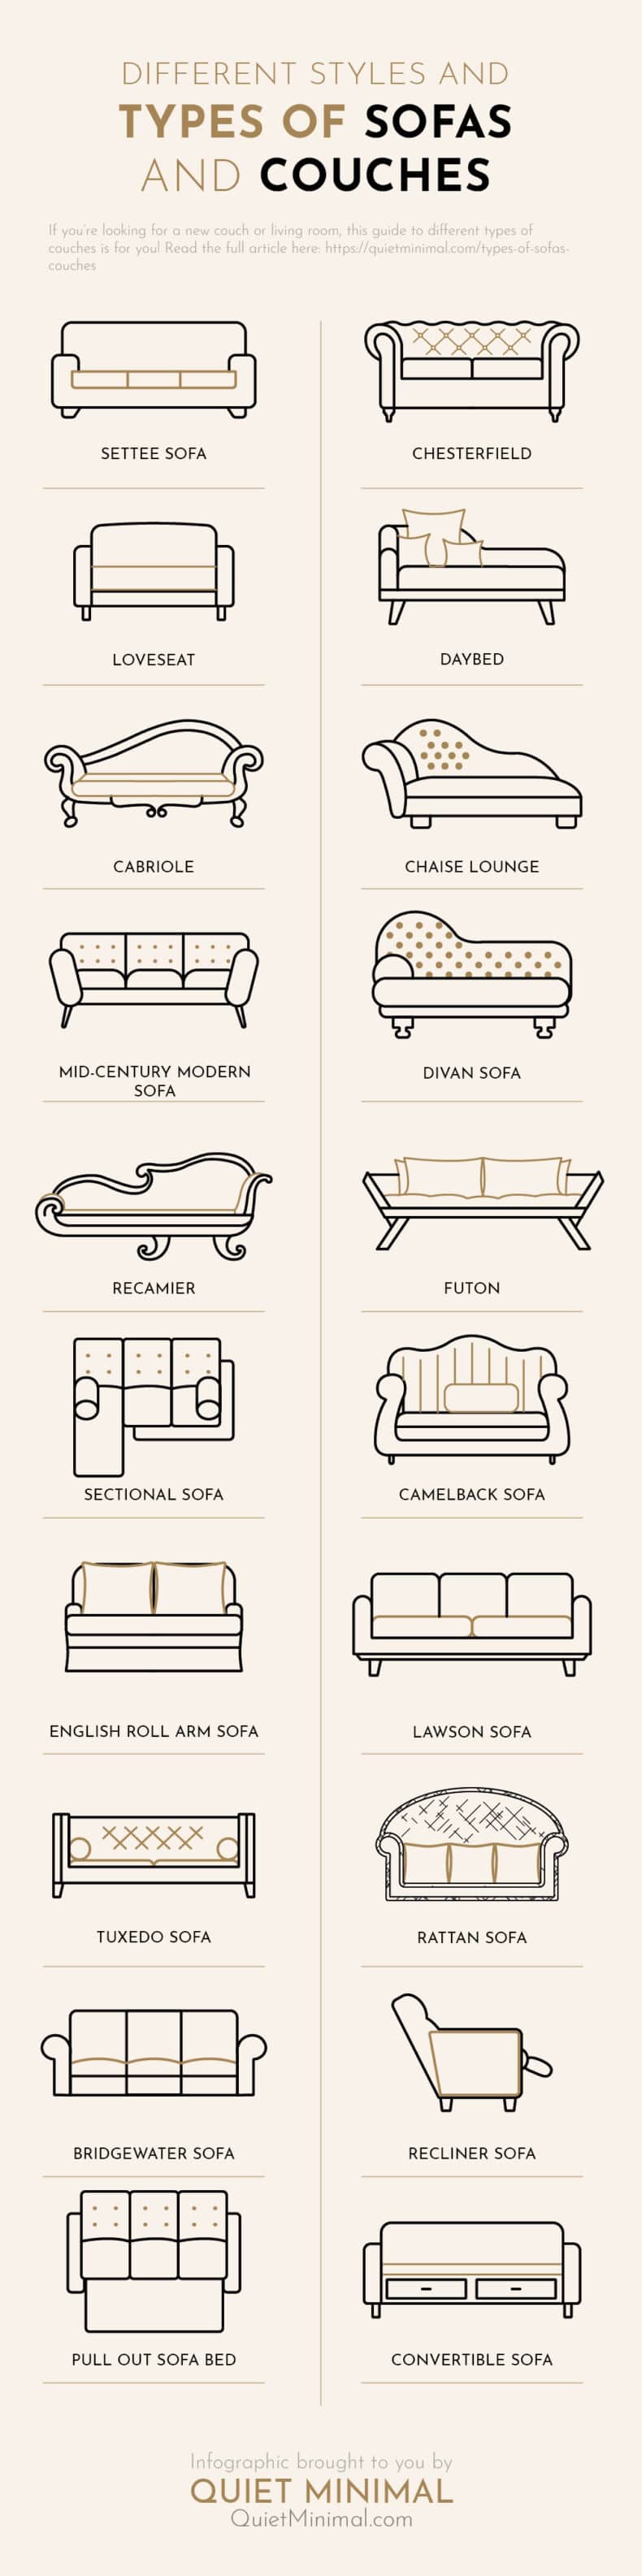 types of sofas and couches